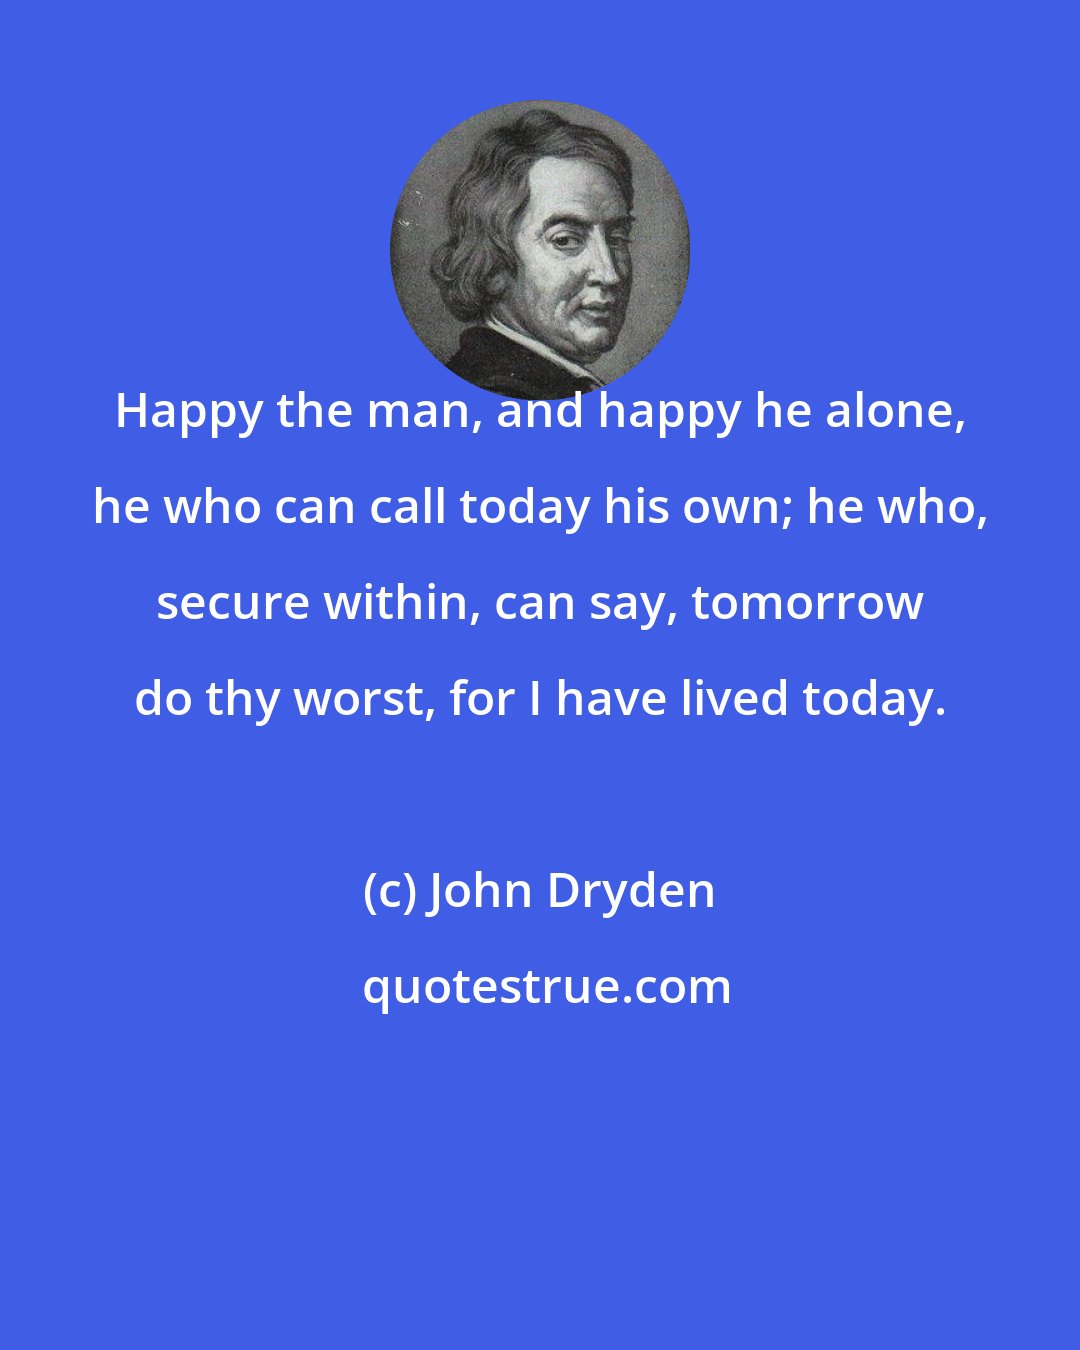 John Dryden: Happy the man, and happy he alone, he who can call today his own; he who, secure within, can say, tomorrow do thy worst, for I have lived today.